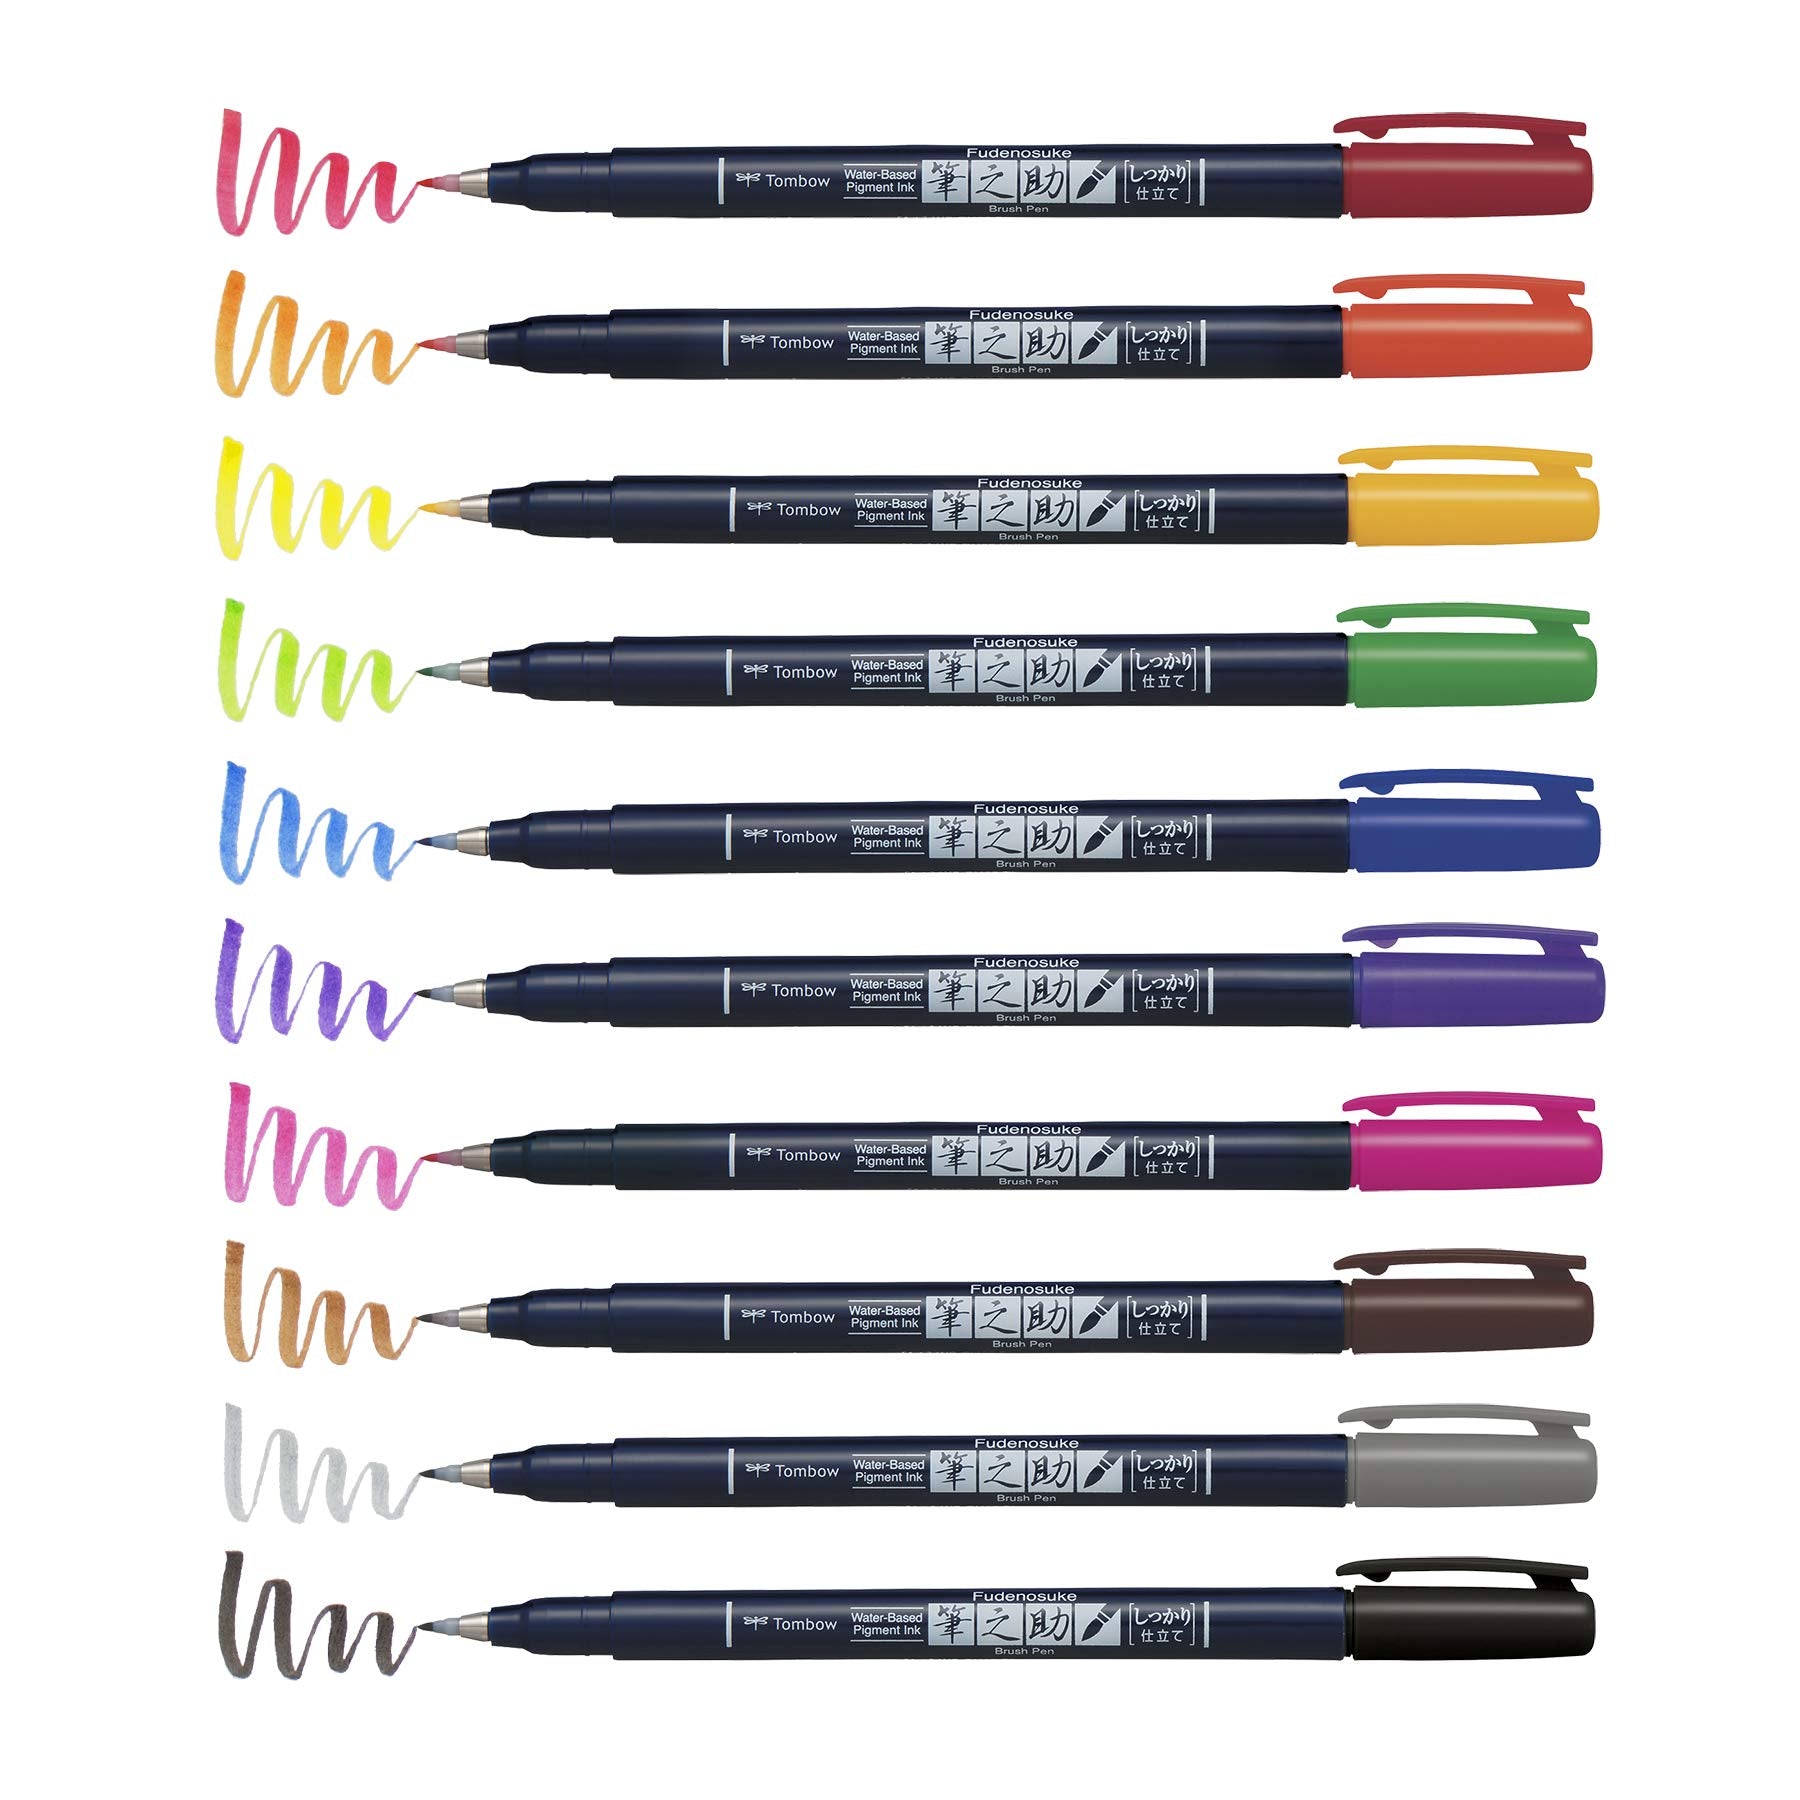 Etchr Coloured Graphic Pen Collection